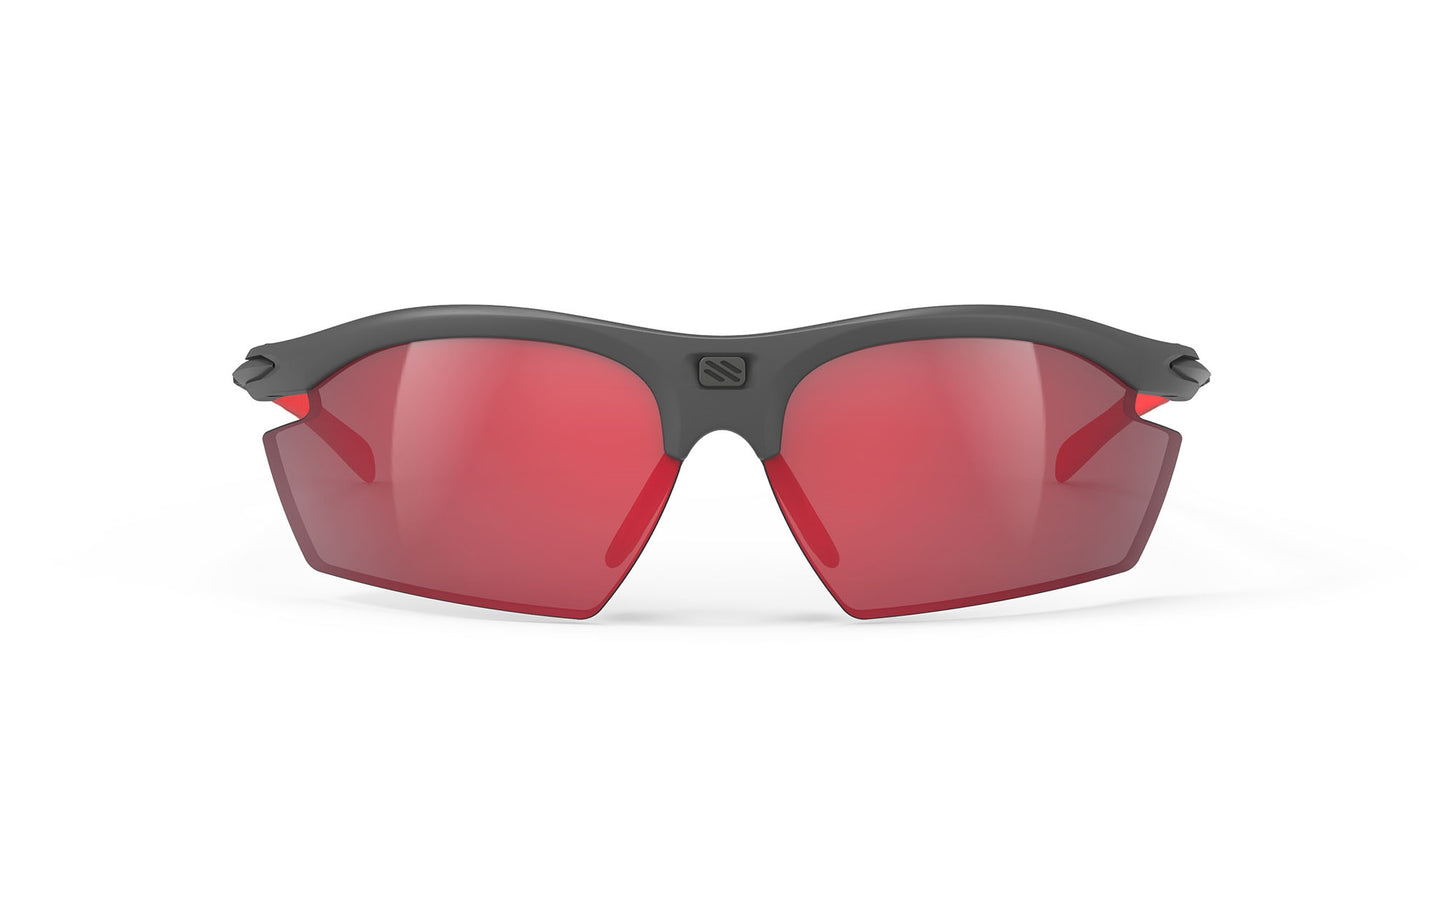 Load image into Gallery viewer, Rudy Project Rydon Graphite - Polar 3Fx Hdr Multilaser Red Sunglasses
